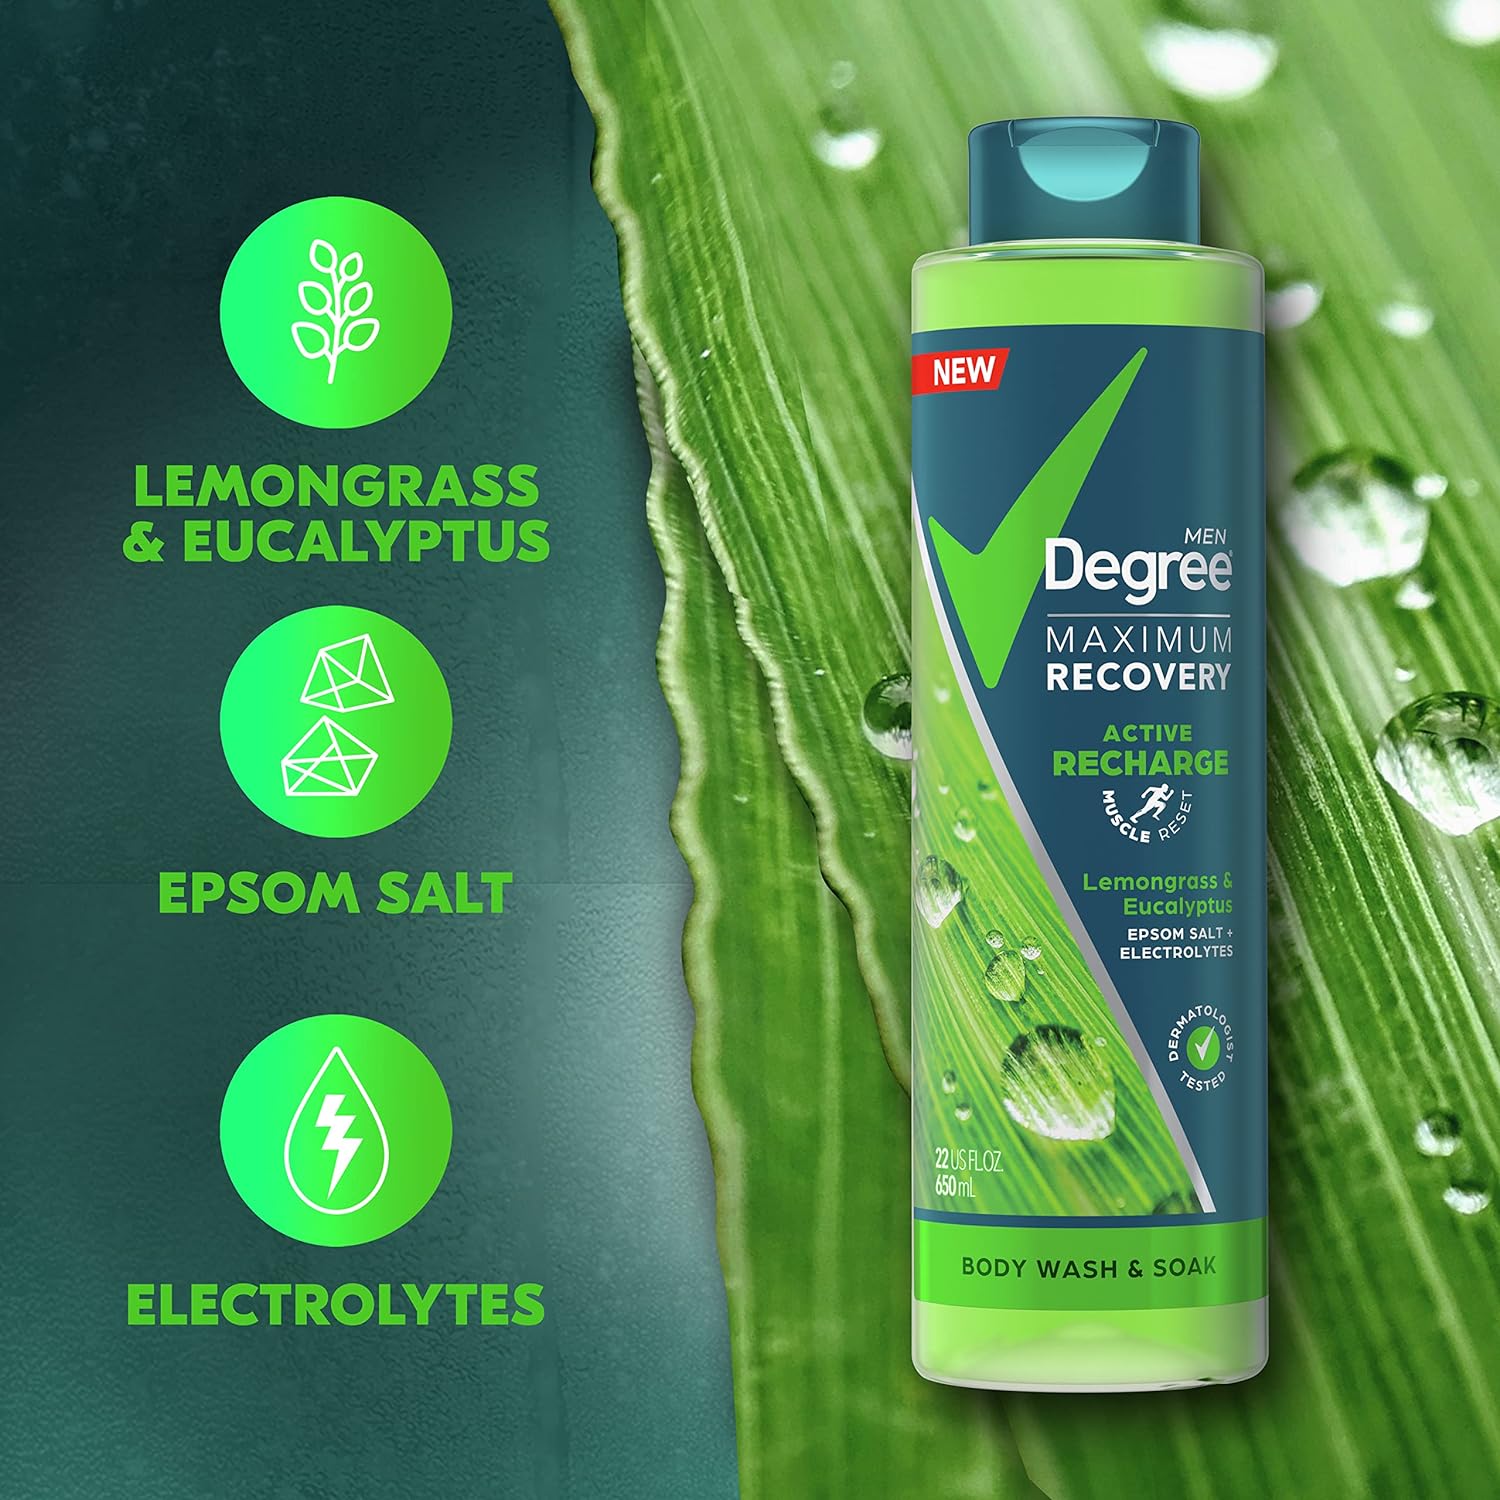 Degree Men Body Wash and Soak For Post-Workout Recovery Skincare Routine Lemongrass and Eucalyptus + Epsom Salt + Electrolytes Bath and Body Product, 22 FL Oz (Pack of 4) : Beauty & Personal Care